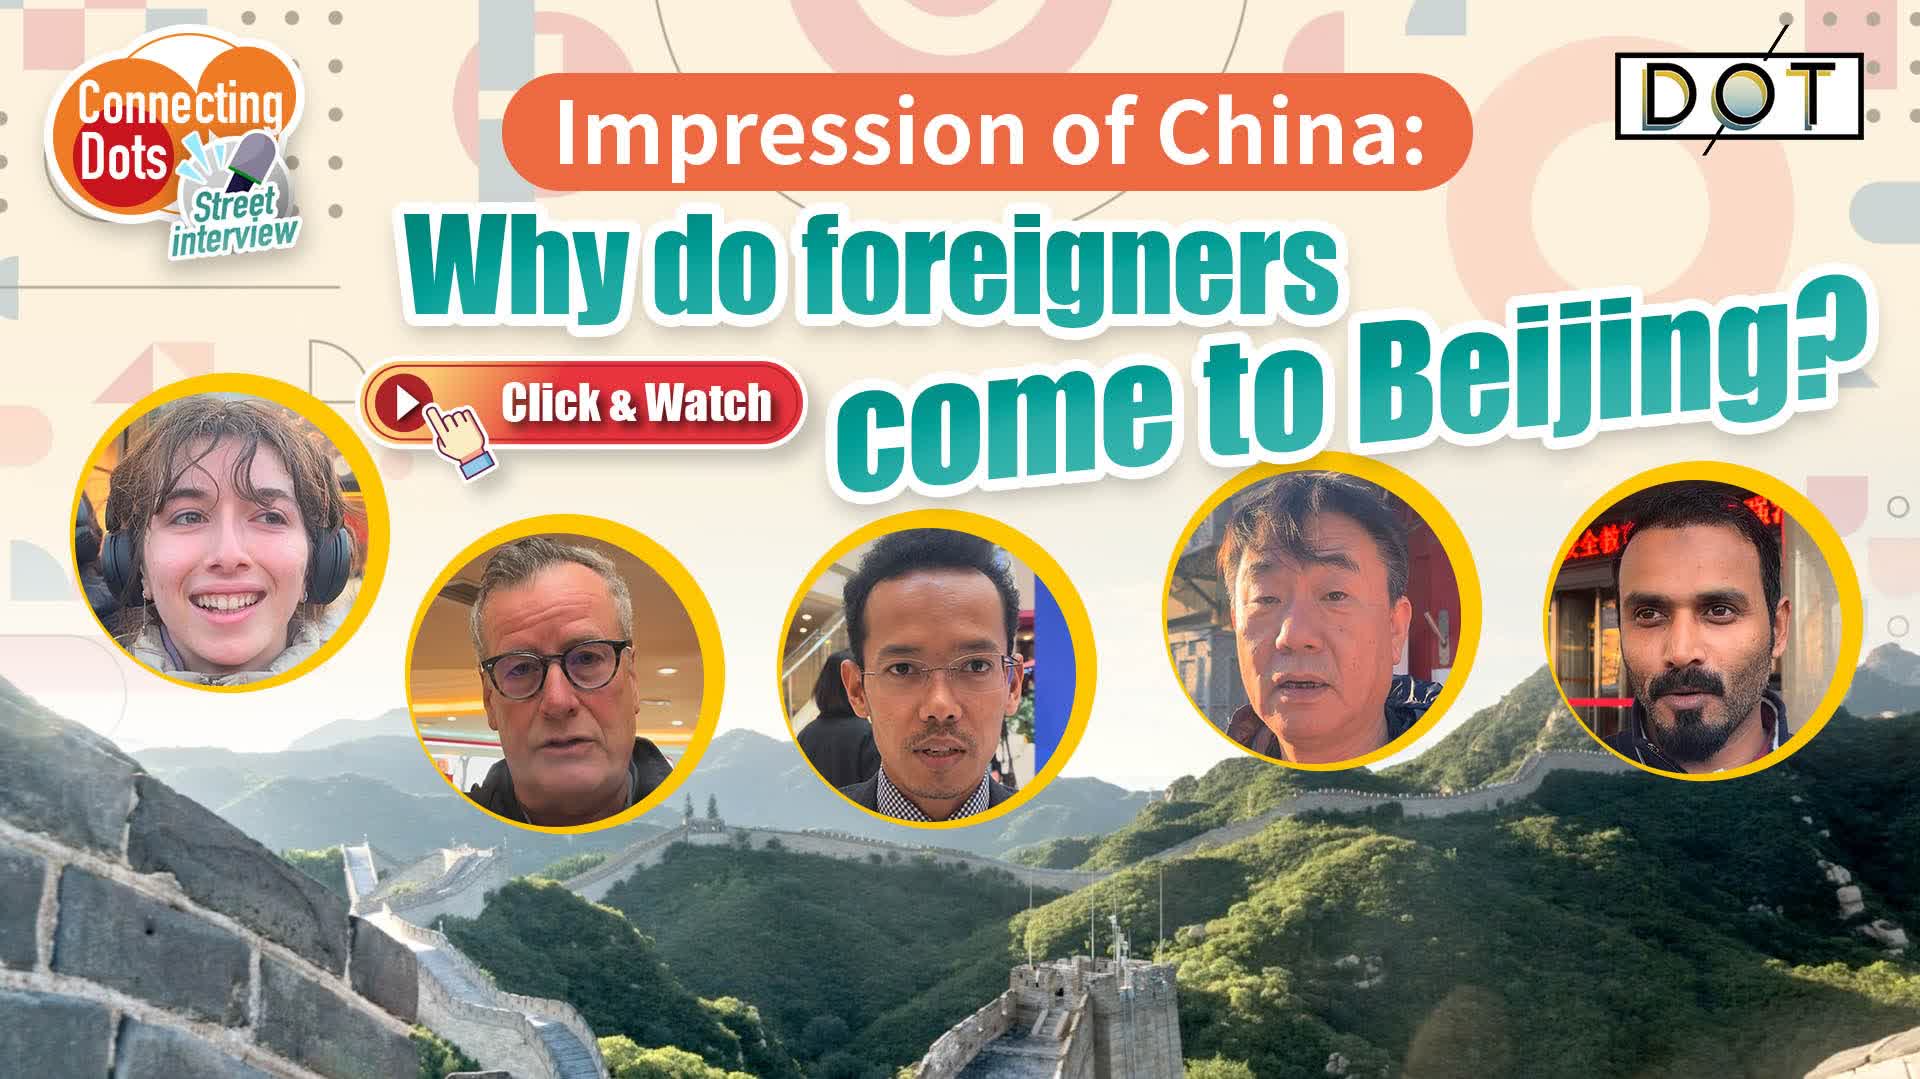 Connecting Dots | Impression of China: Why do foreigners come to Beijing?